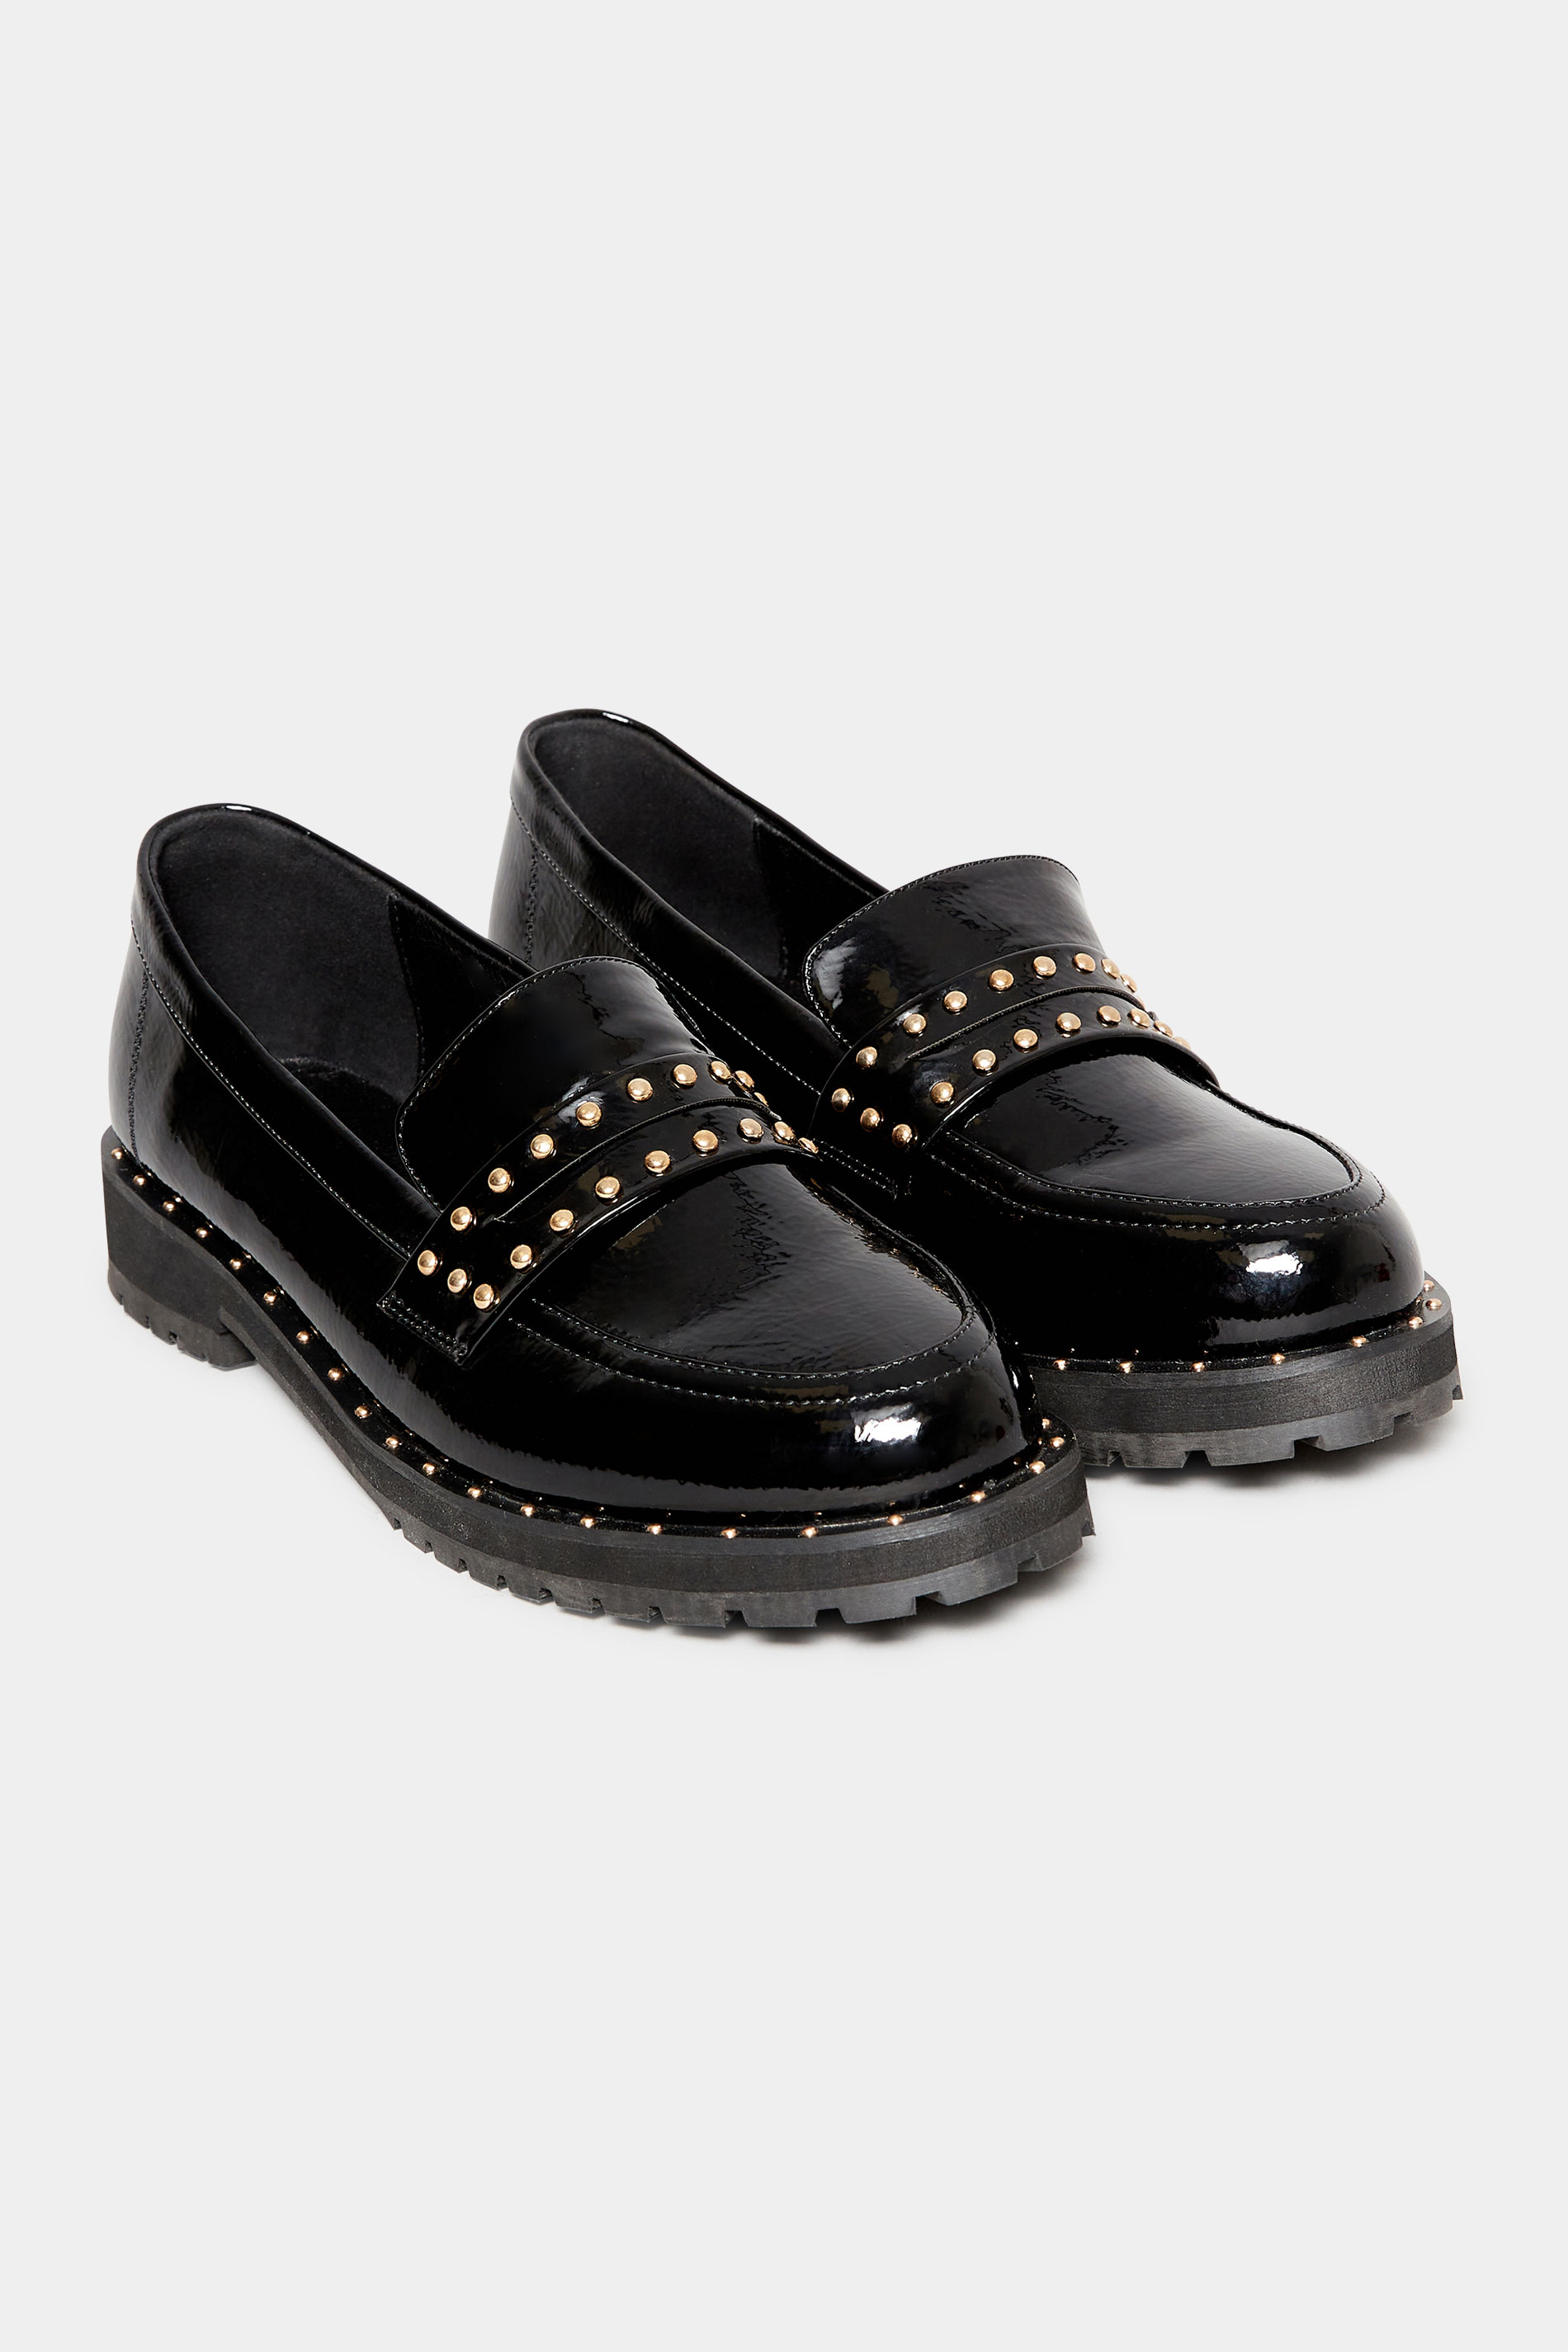 LTS Black Patent Studded Loafers In Standard D Fit 1